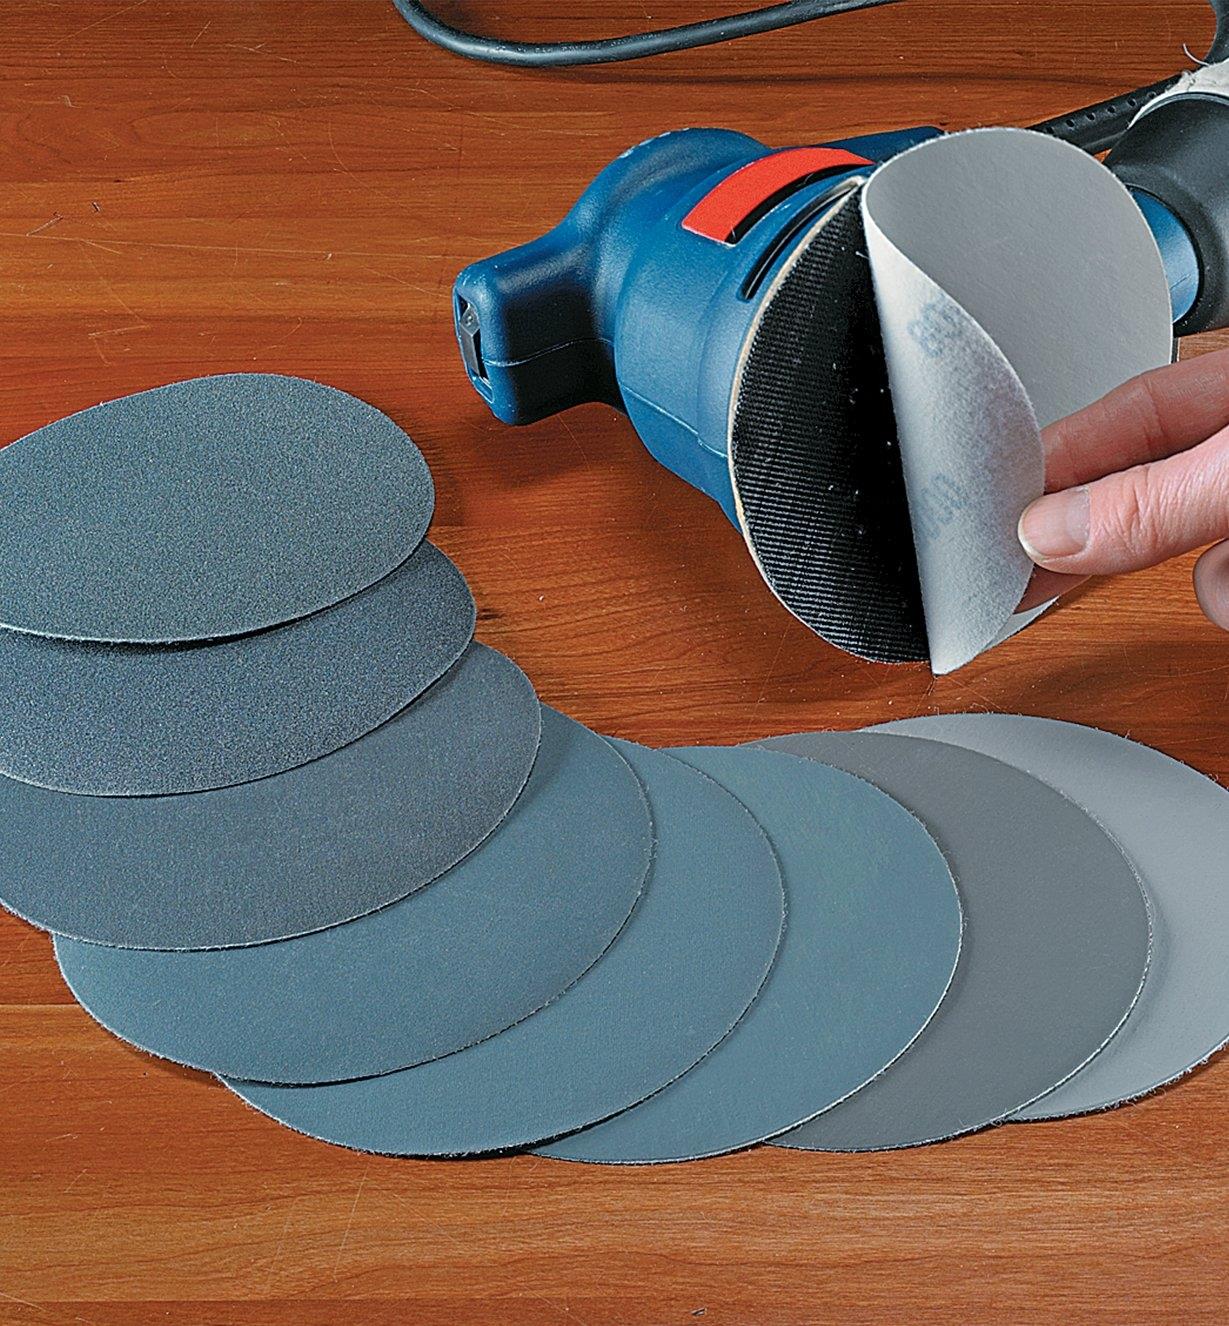 Set of 8 Micro-Mesh Discs spread out beside an electric sander